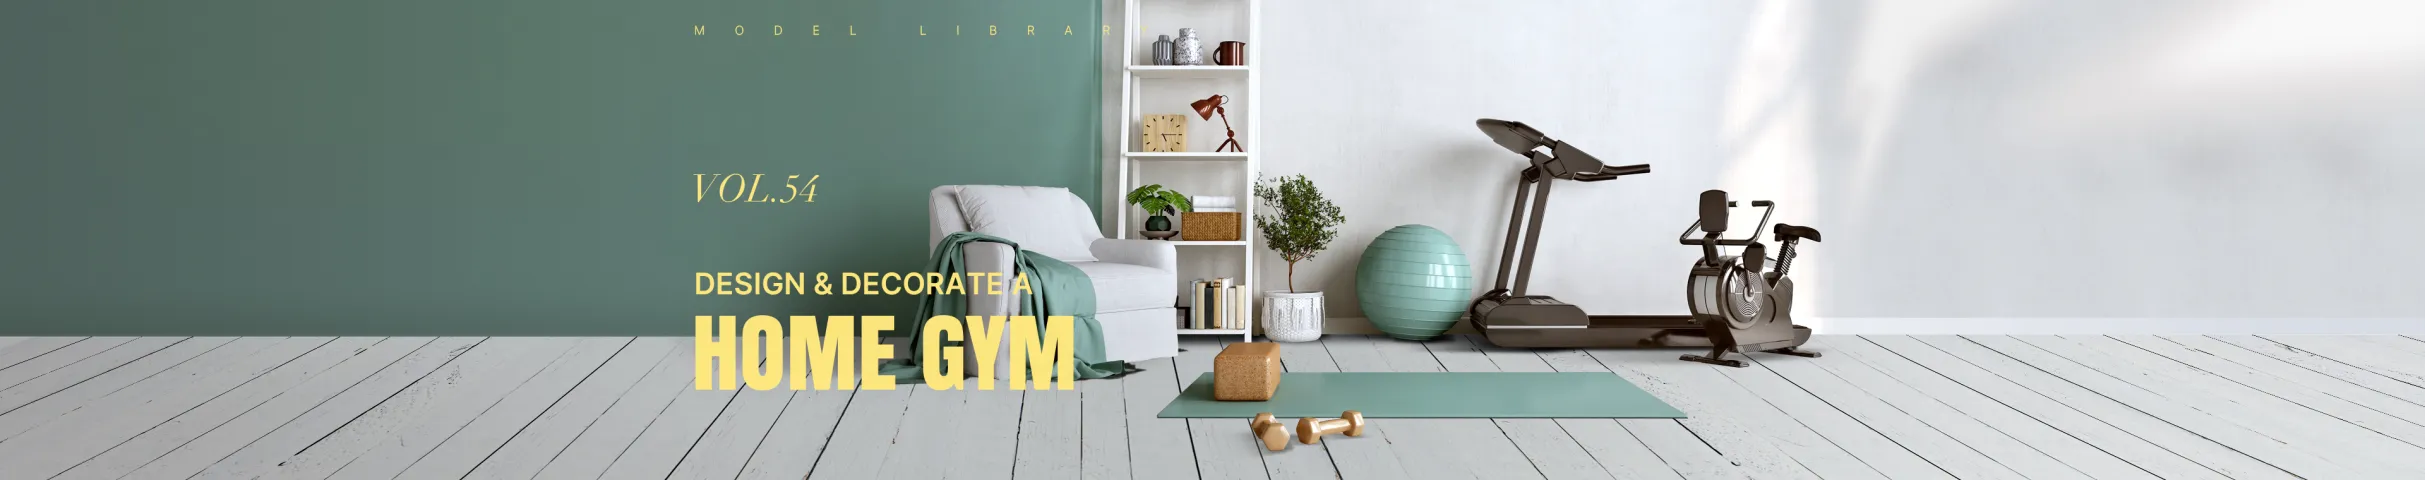 Design and Decorate a Home Gym